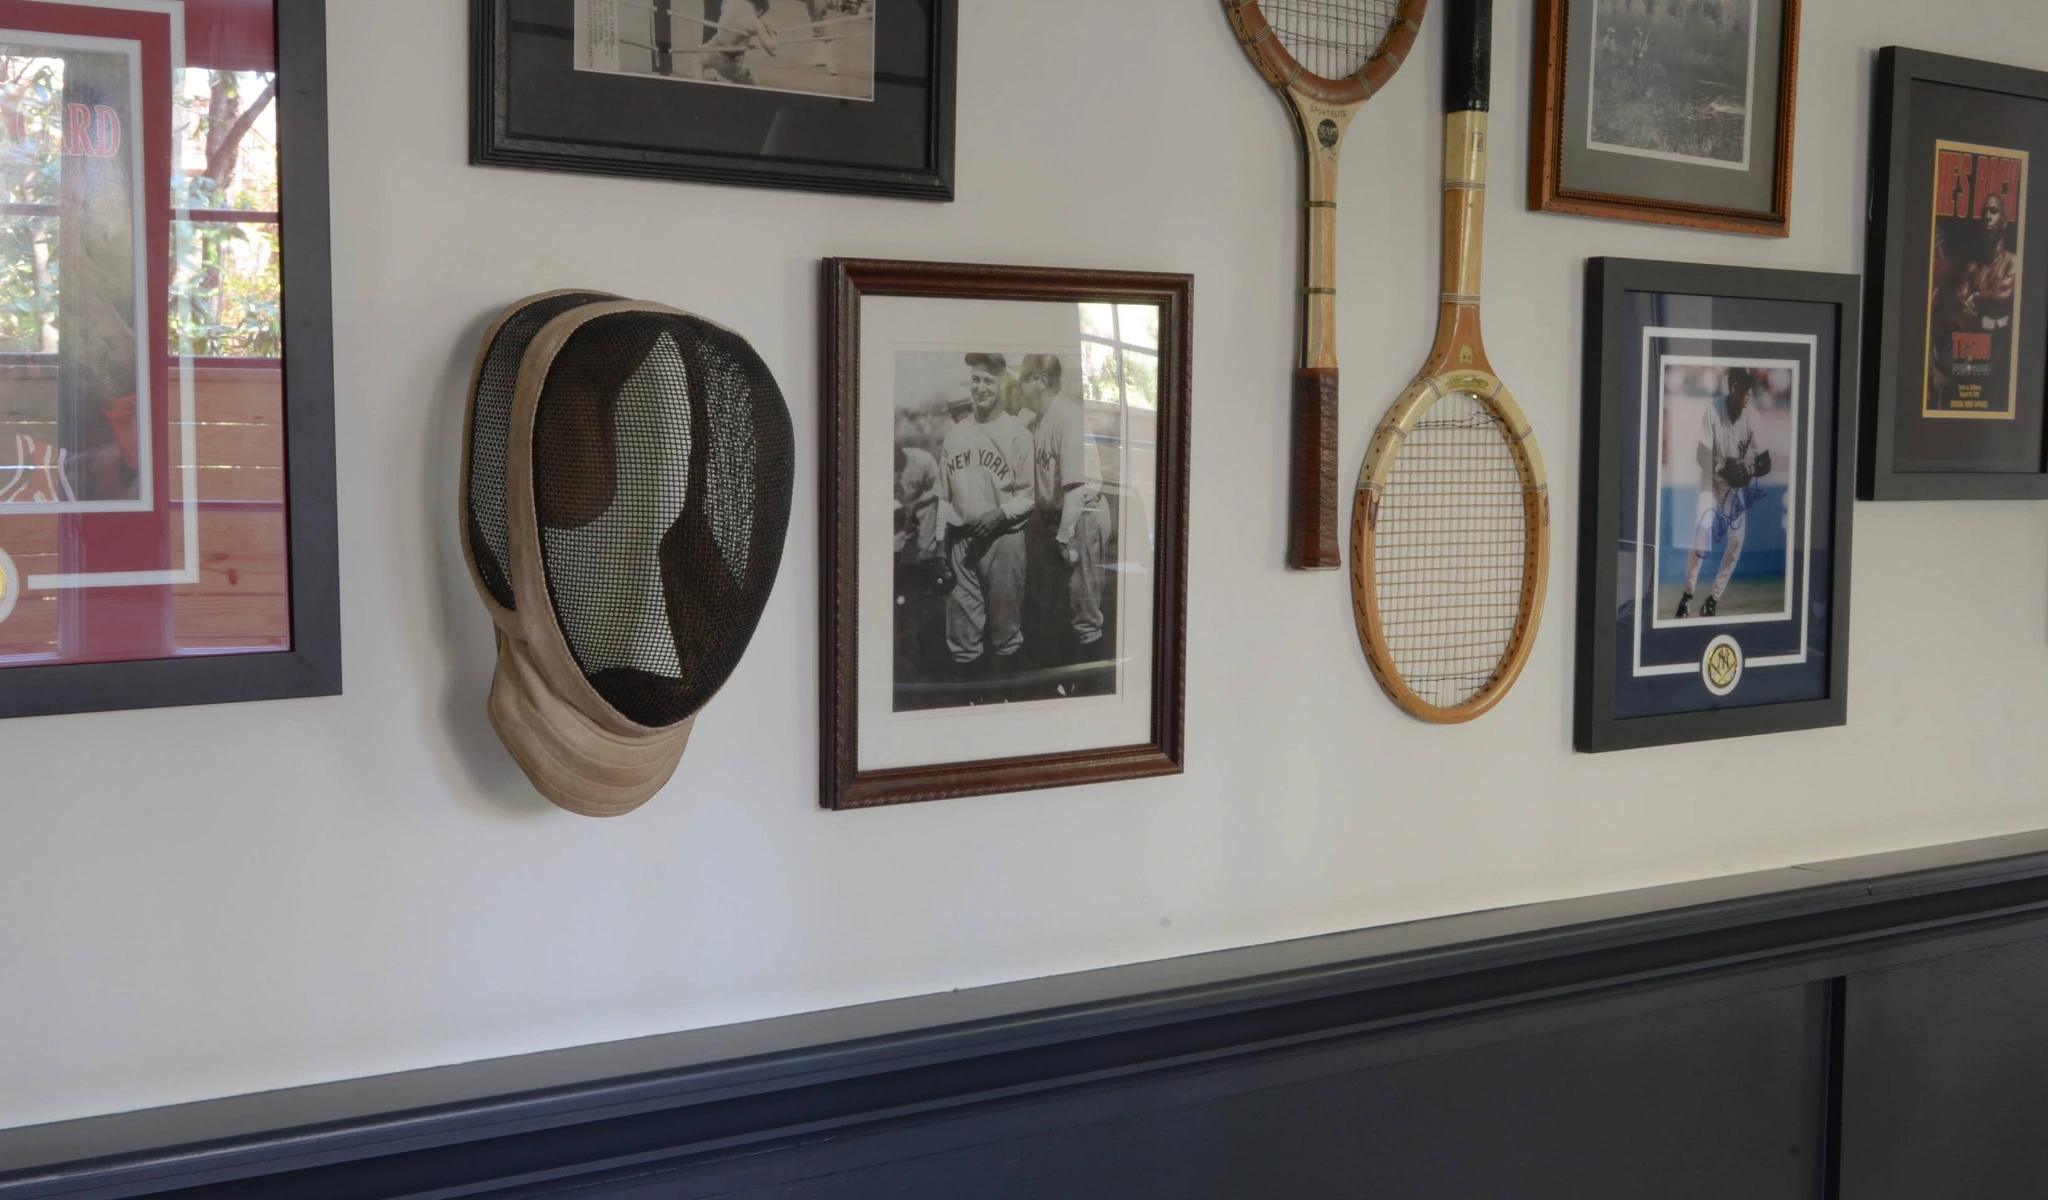 A wall of tennis racquets and other sports memorabilia.